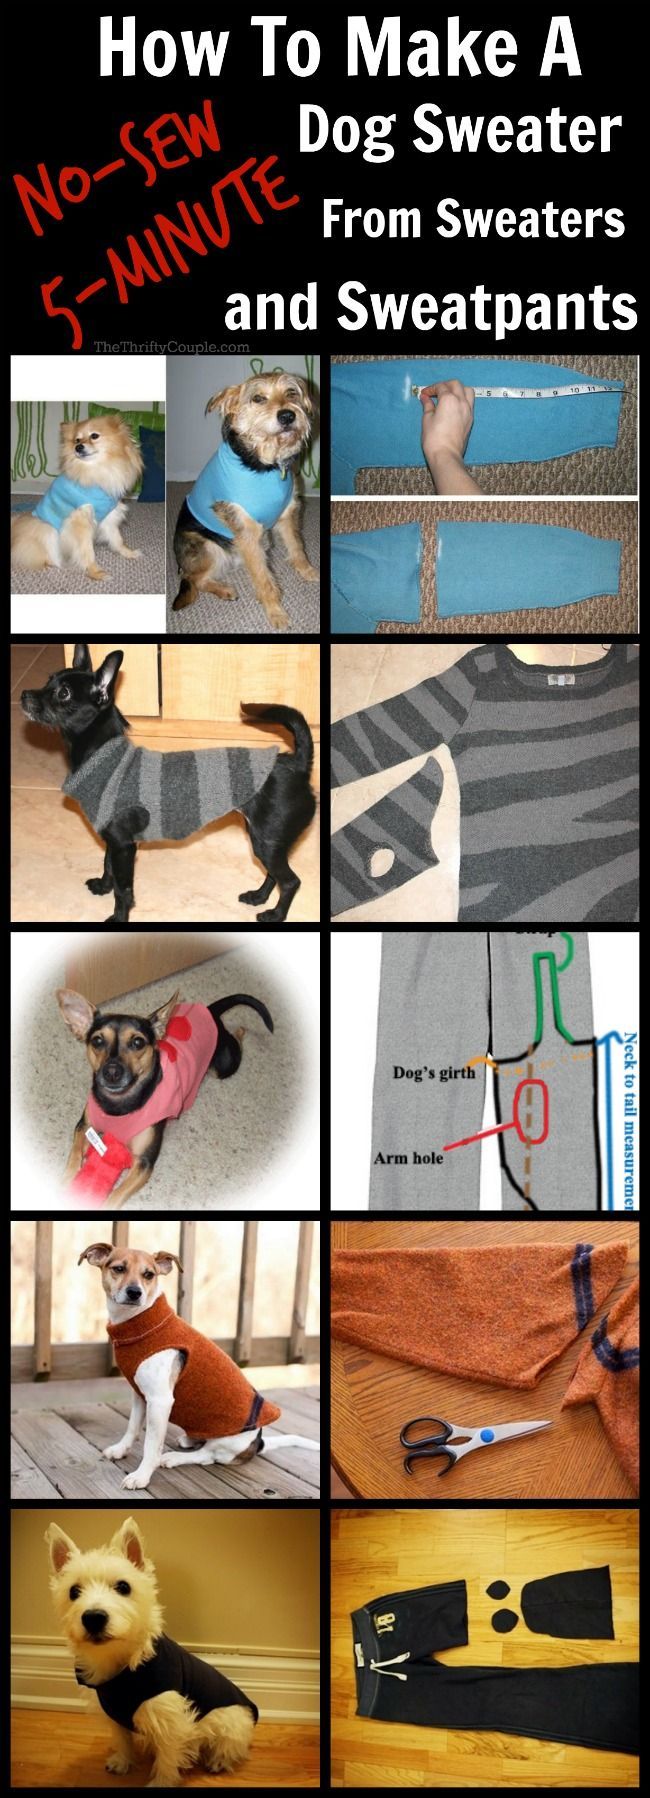 How To Turn Old Sweaters and Sweatpants Into No-Sew Dog Sweaters in 5- - How To Turn Old Sweaters and Sweatpants Into No-Sew Dog Sweaters in 5- -   18 diy Dog coat ideas